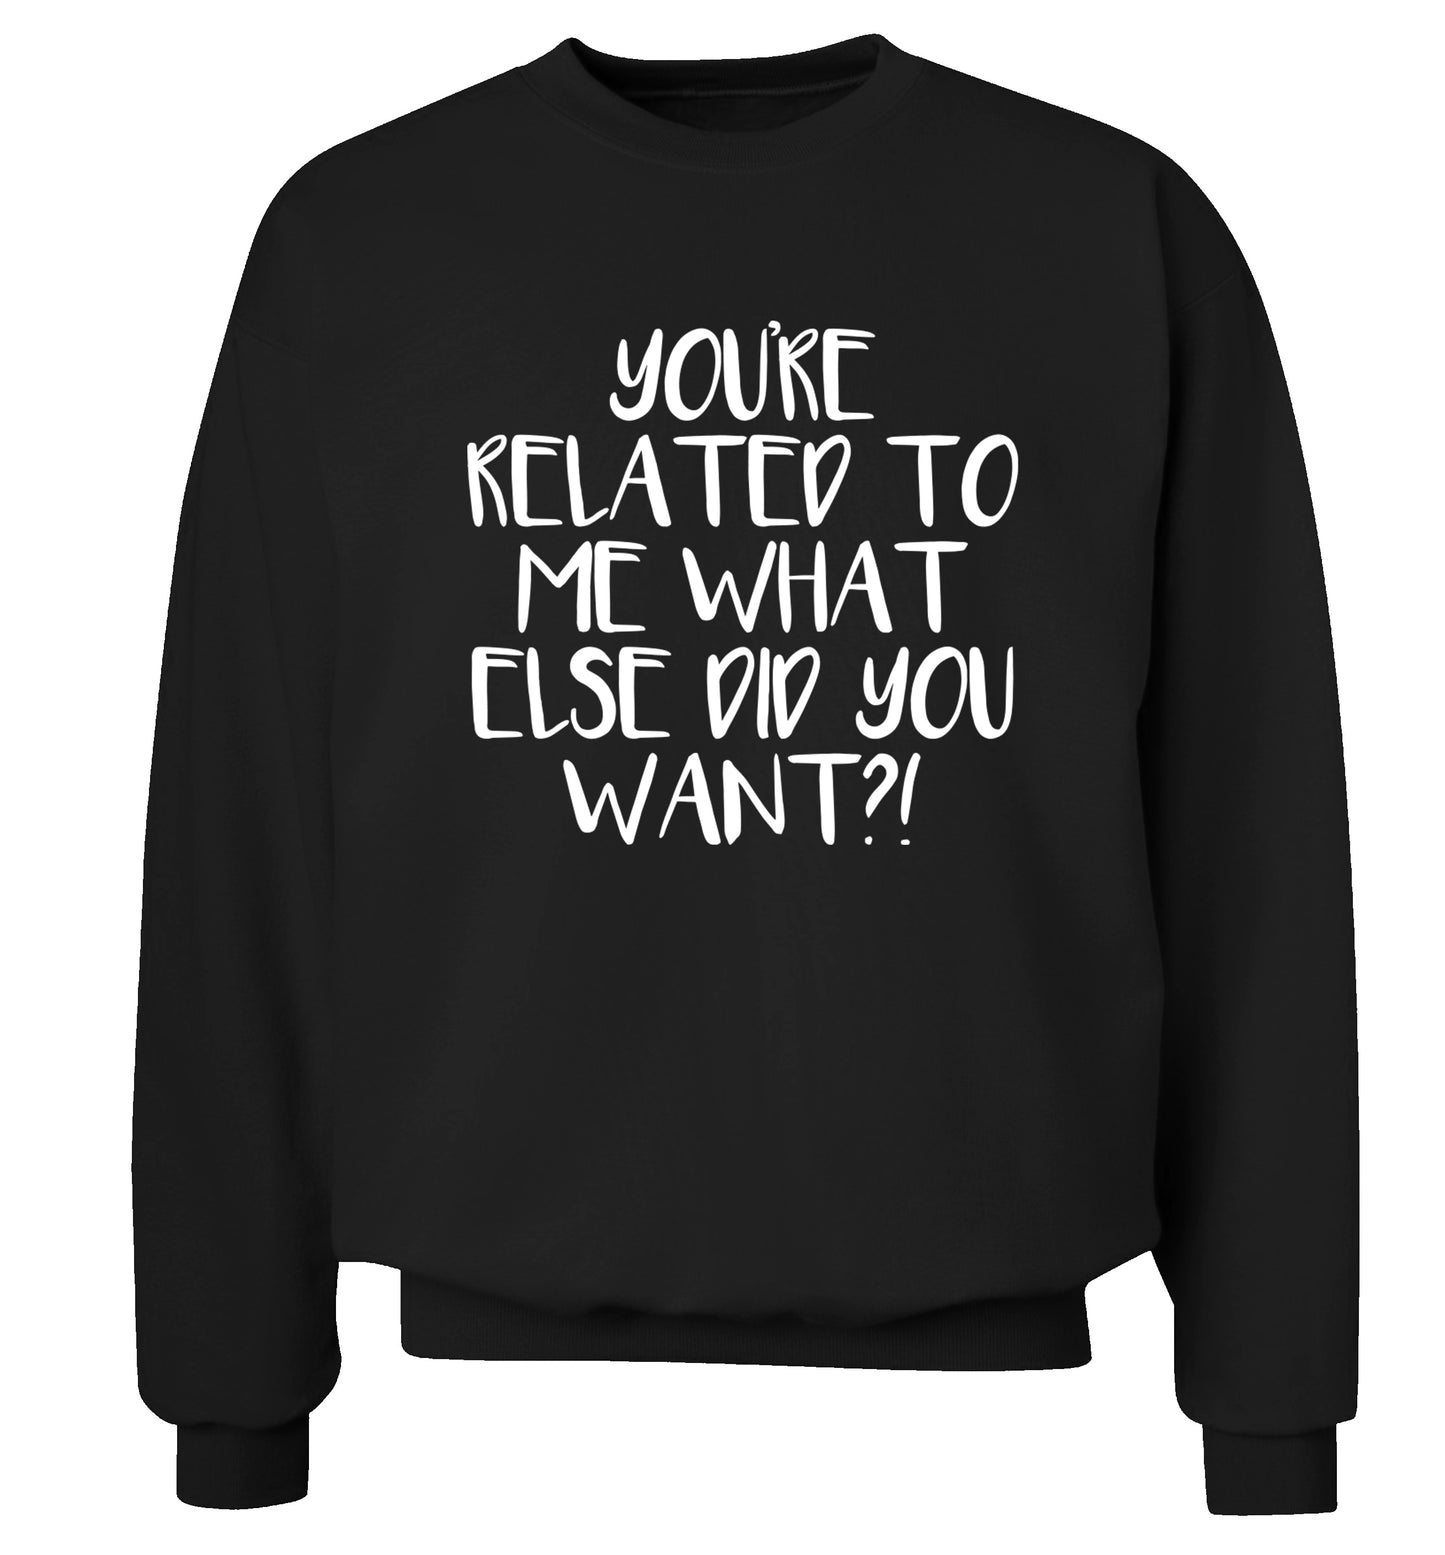 You're related to me what more do you want? Adult's unisex black Sweater 2XL